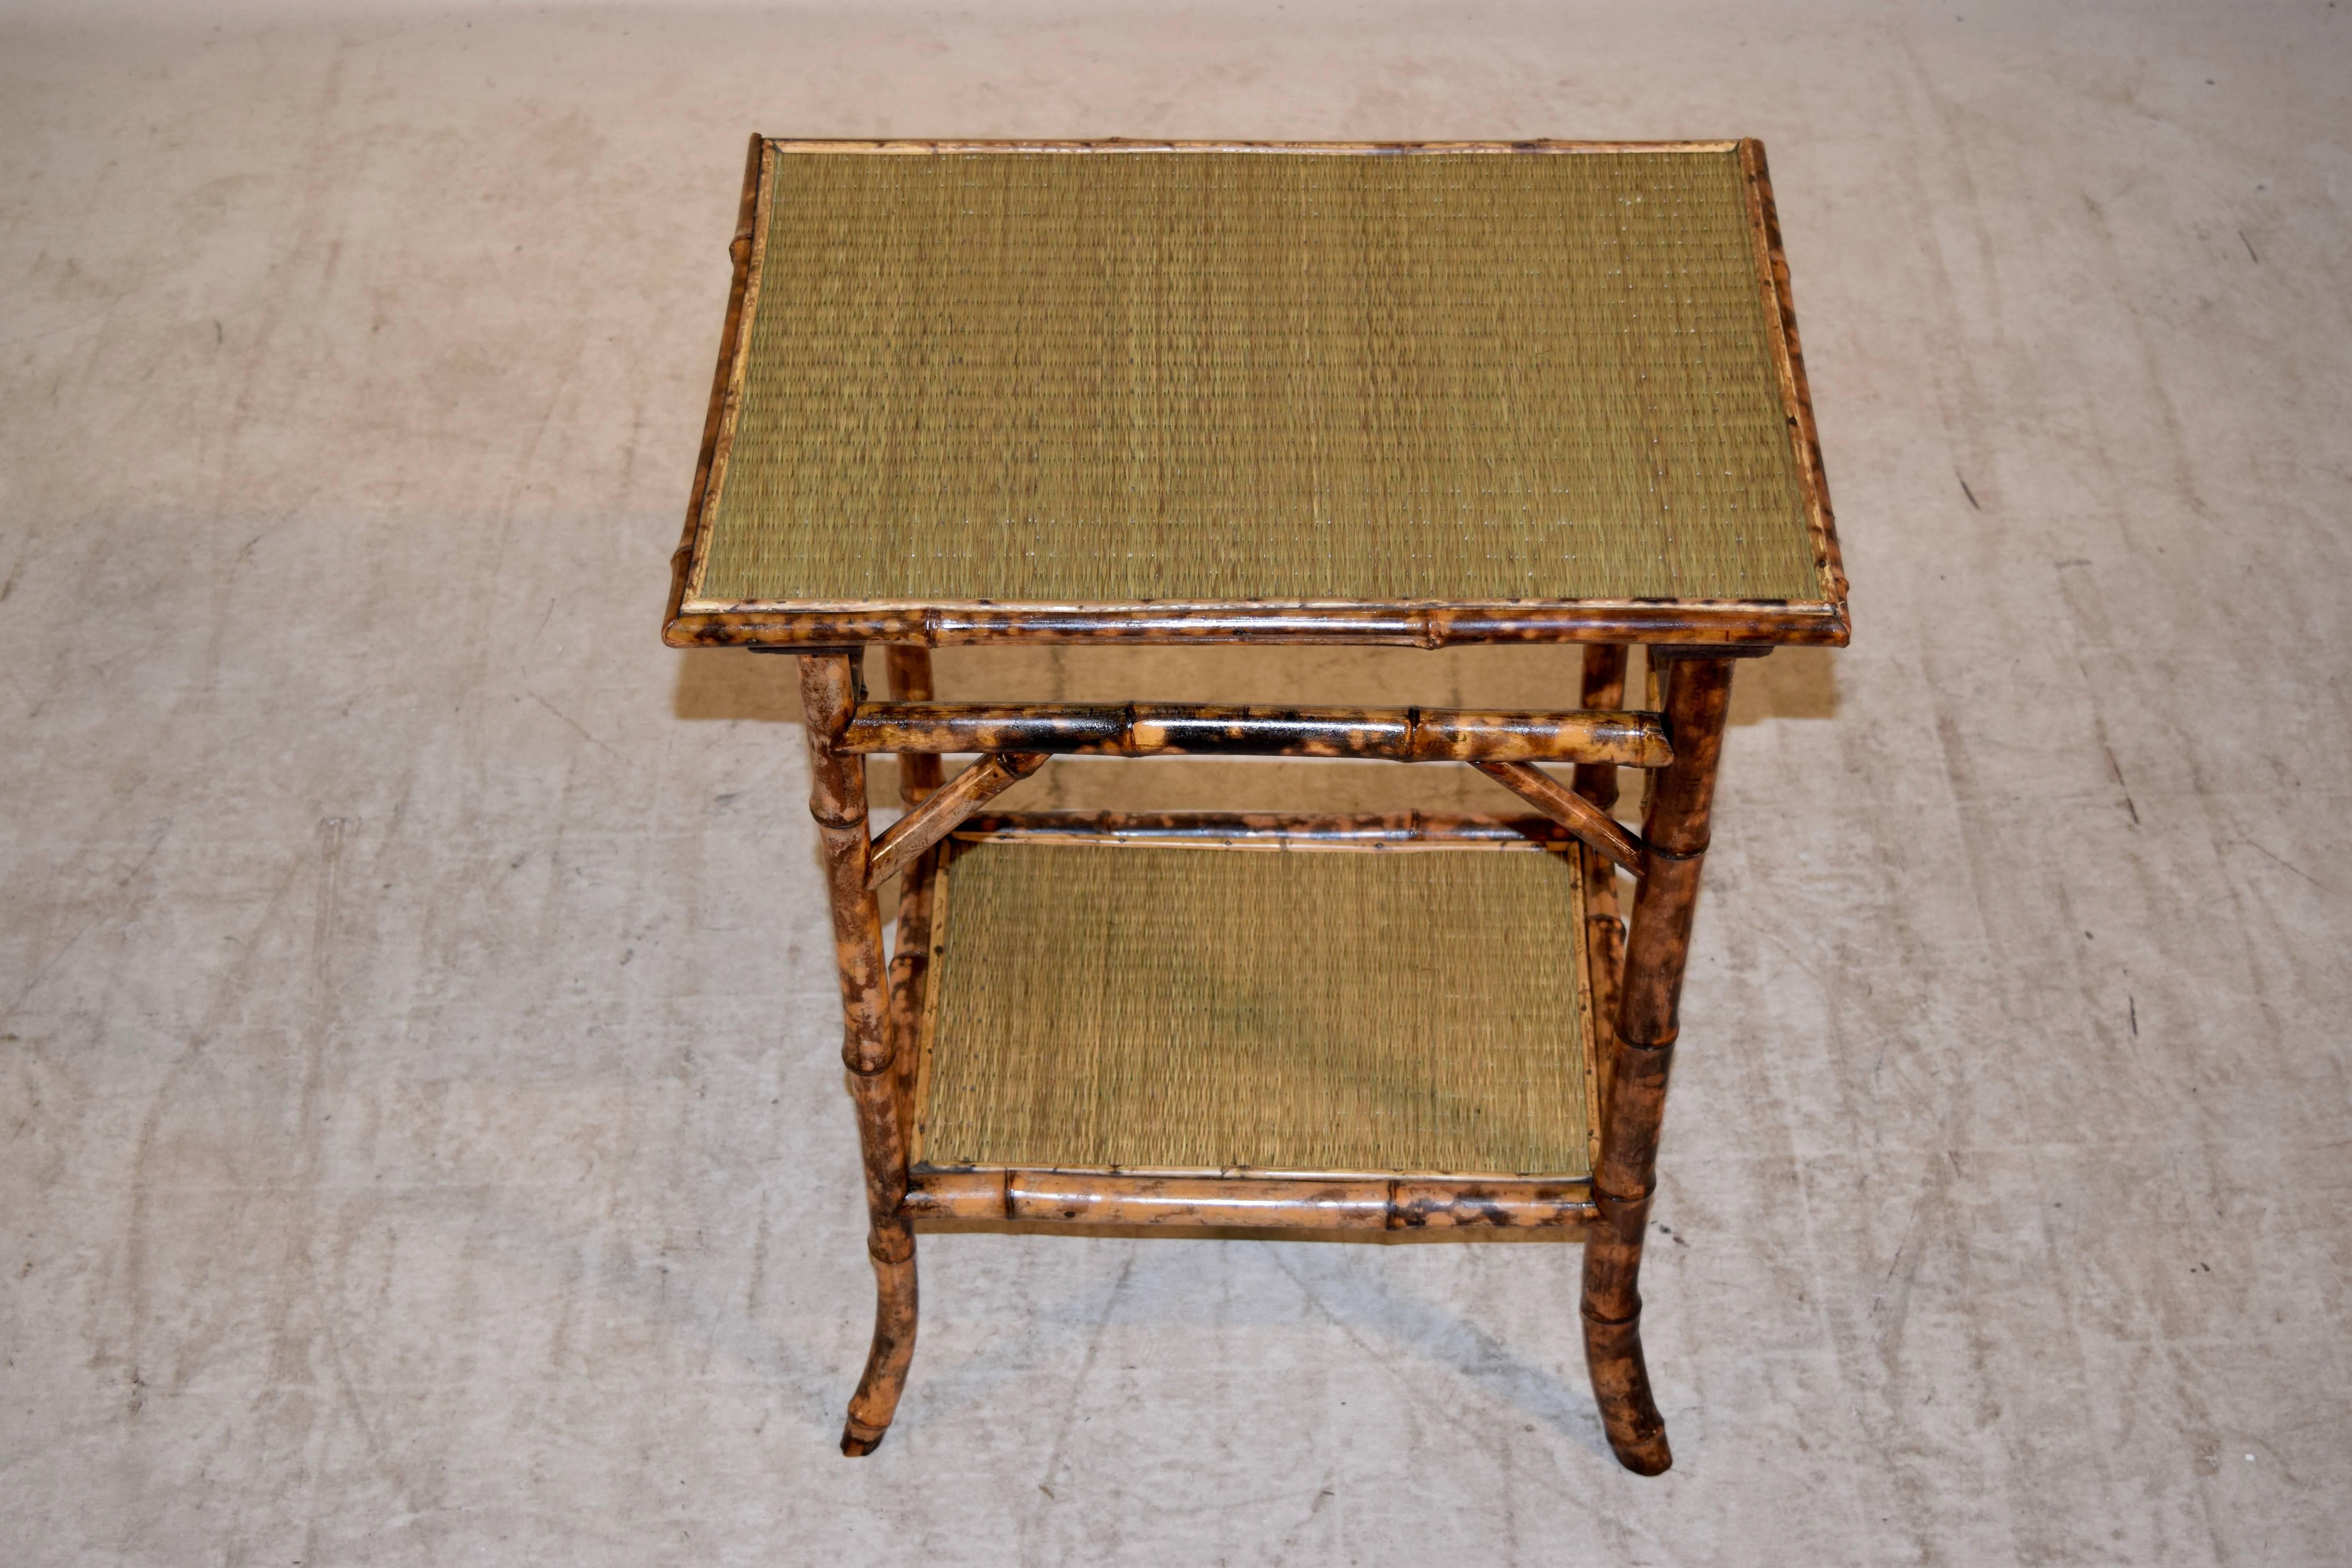 19th century French side table made from tortoise bamboo with splayed legs and rush covered top and lower shelf.